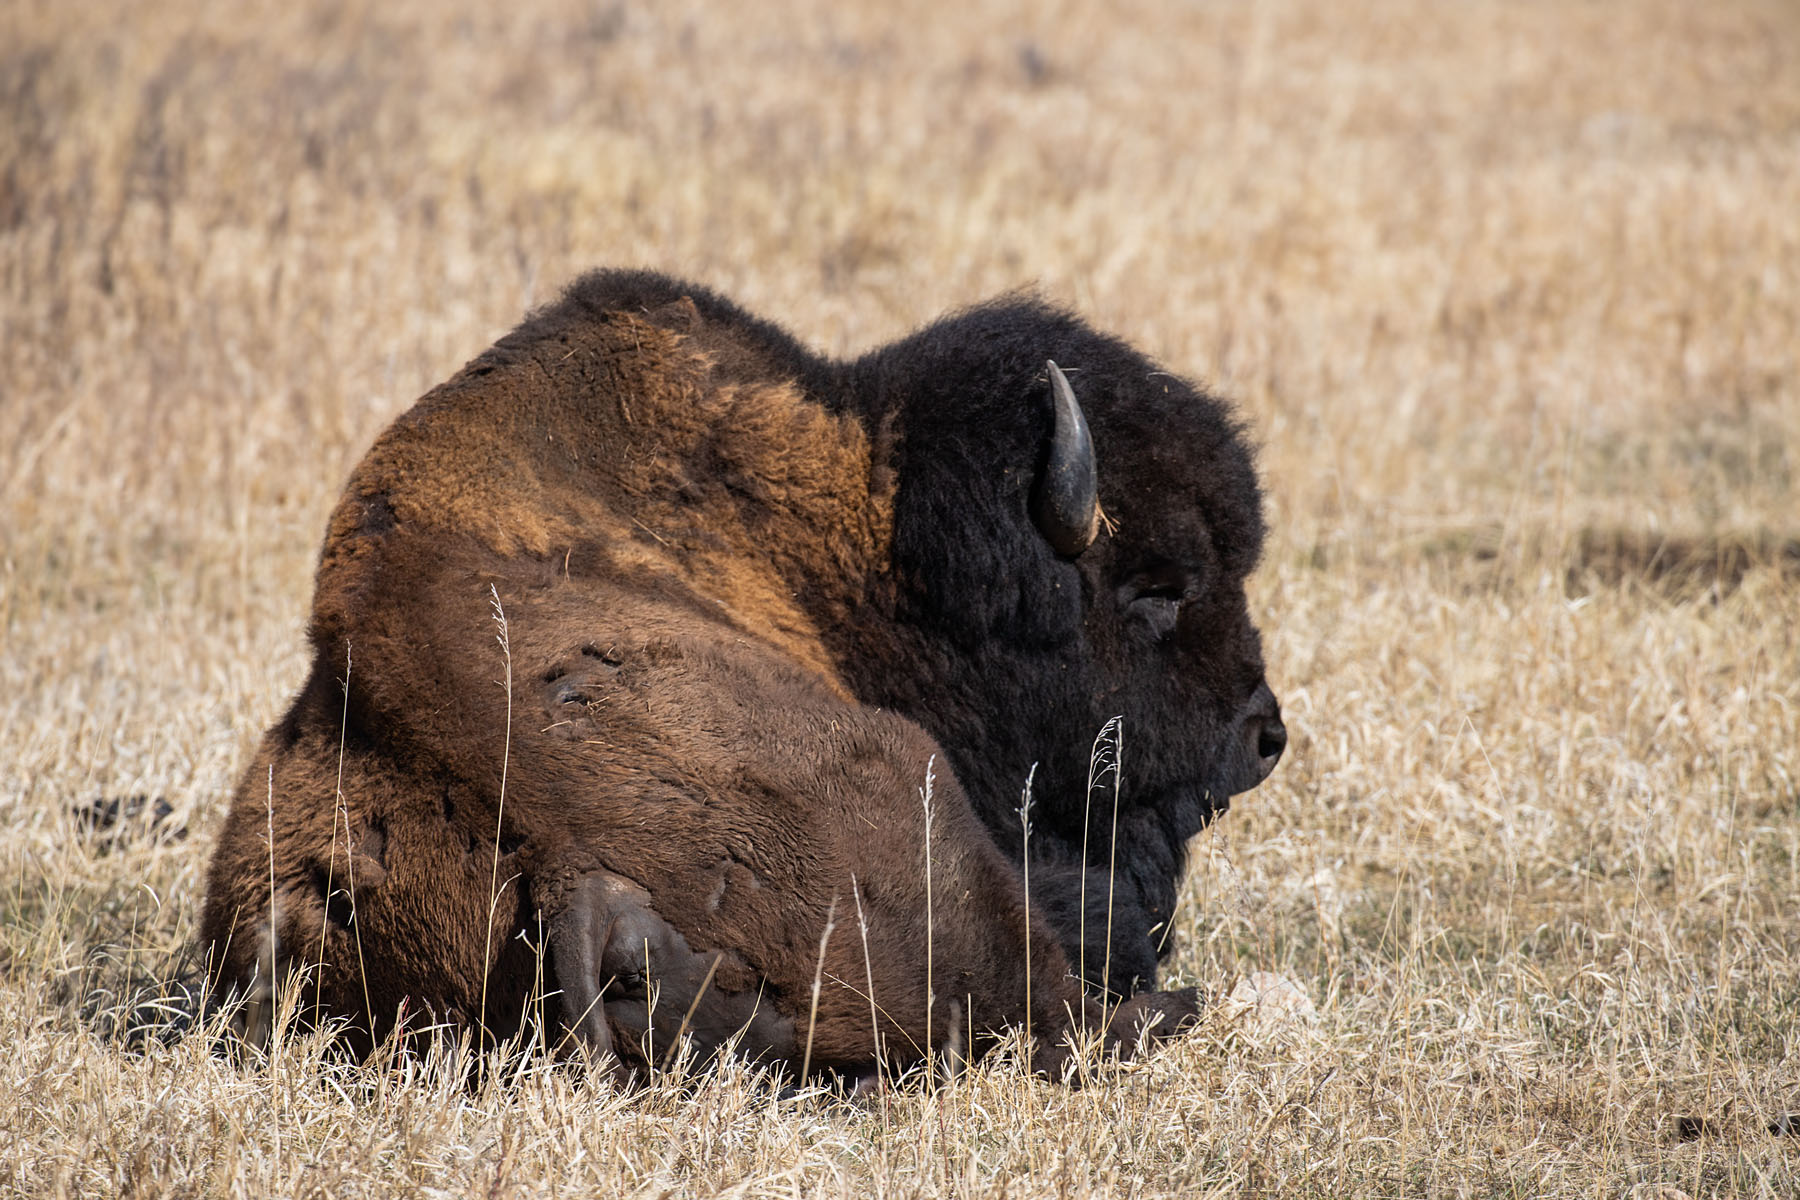 On the trip down to Texas, bison in Custer State Park, SD.  Click for next photo.